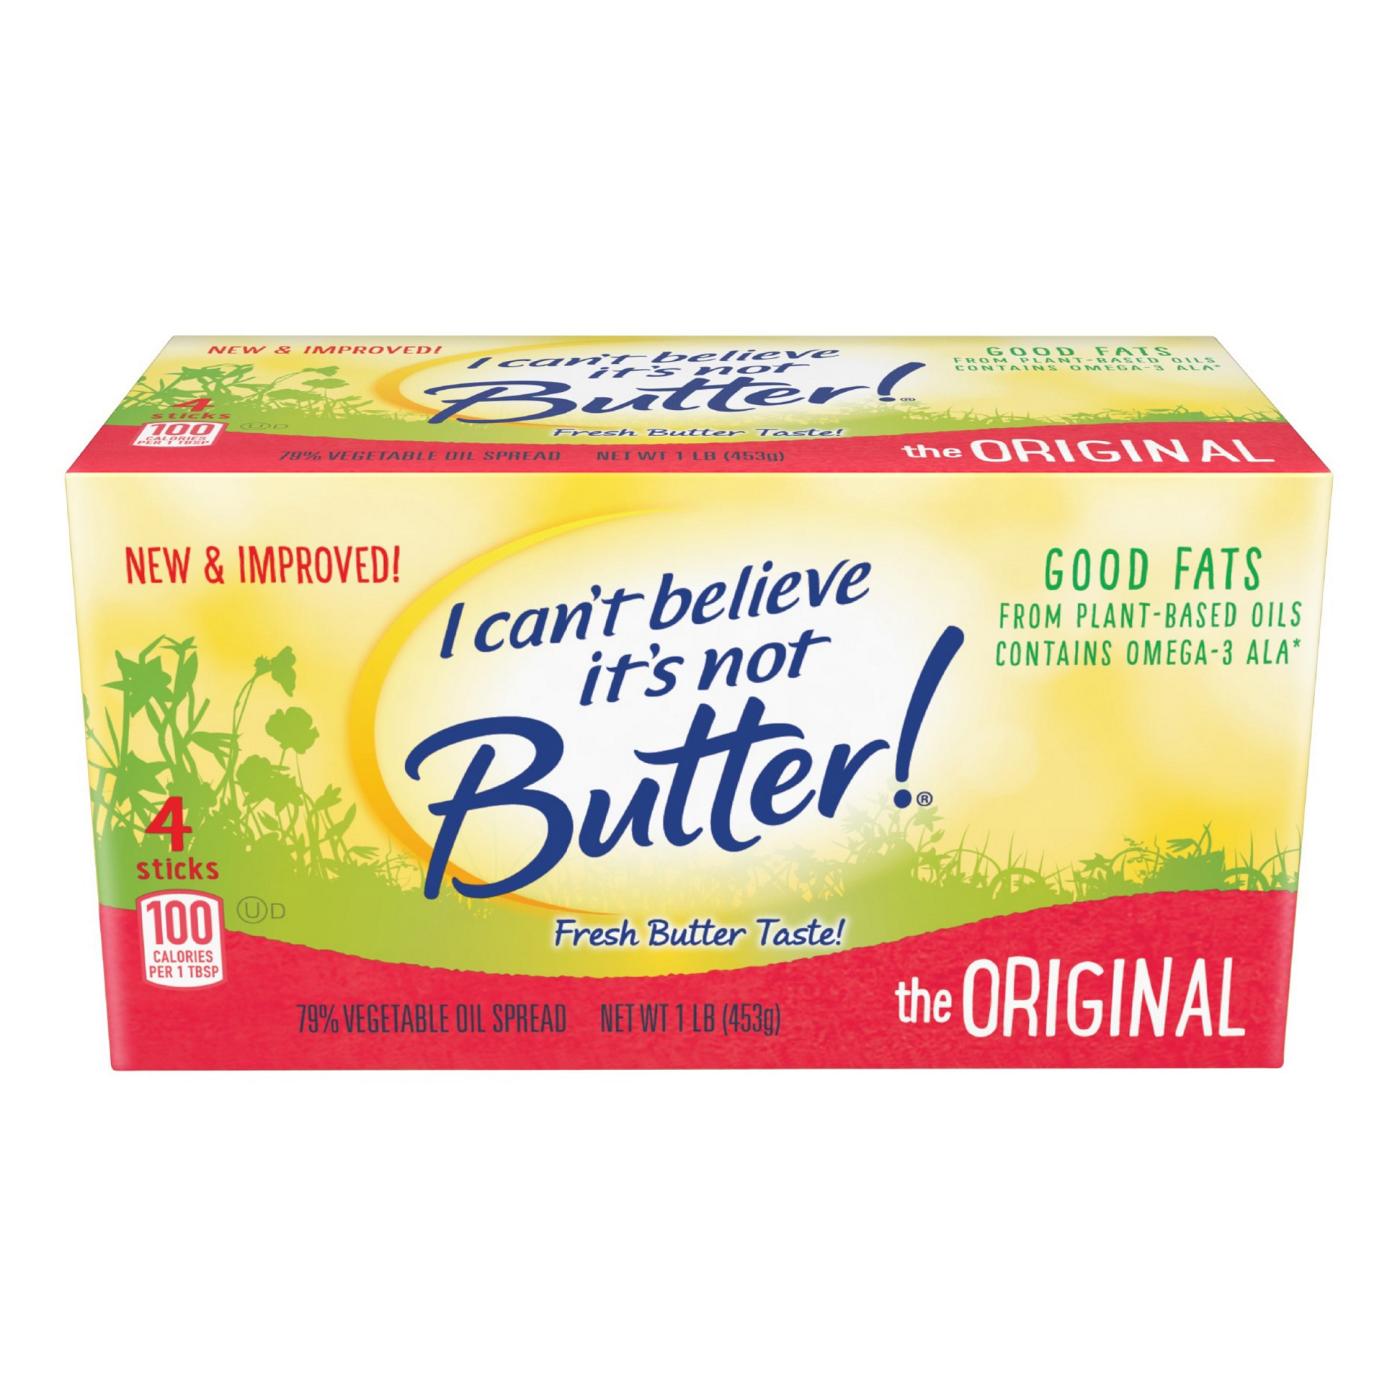 I Can't Believe It's Not Butter! Baking Sticks; image 1 of 6